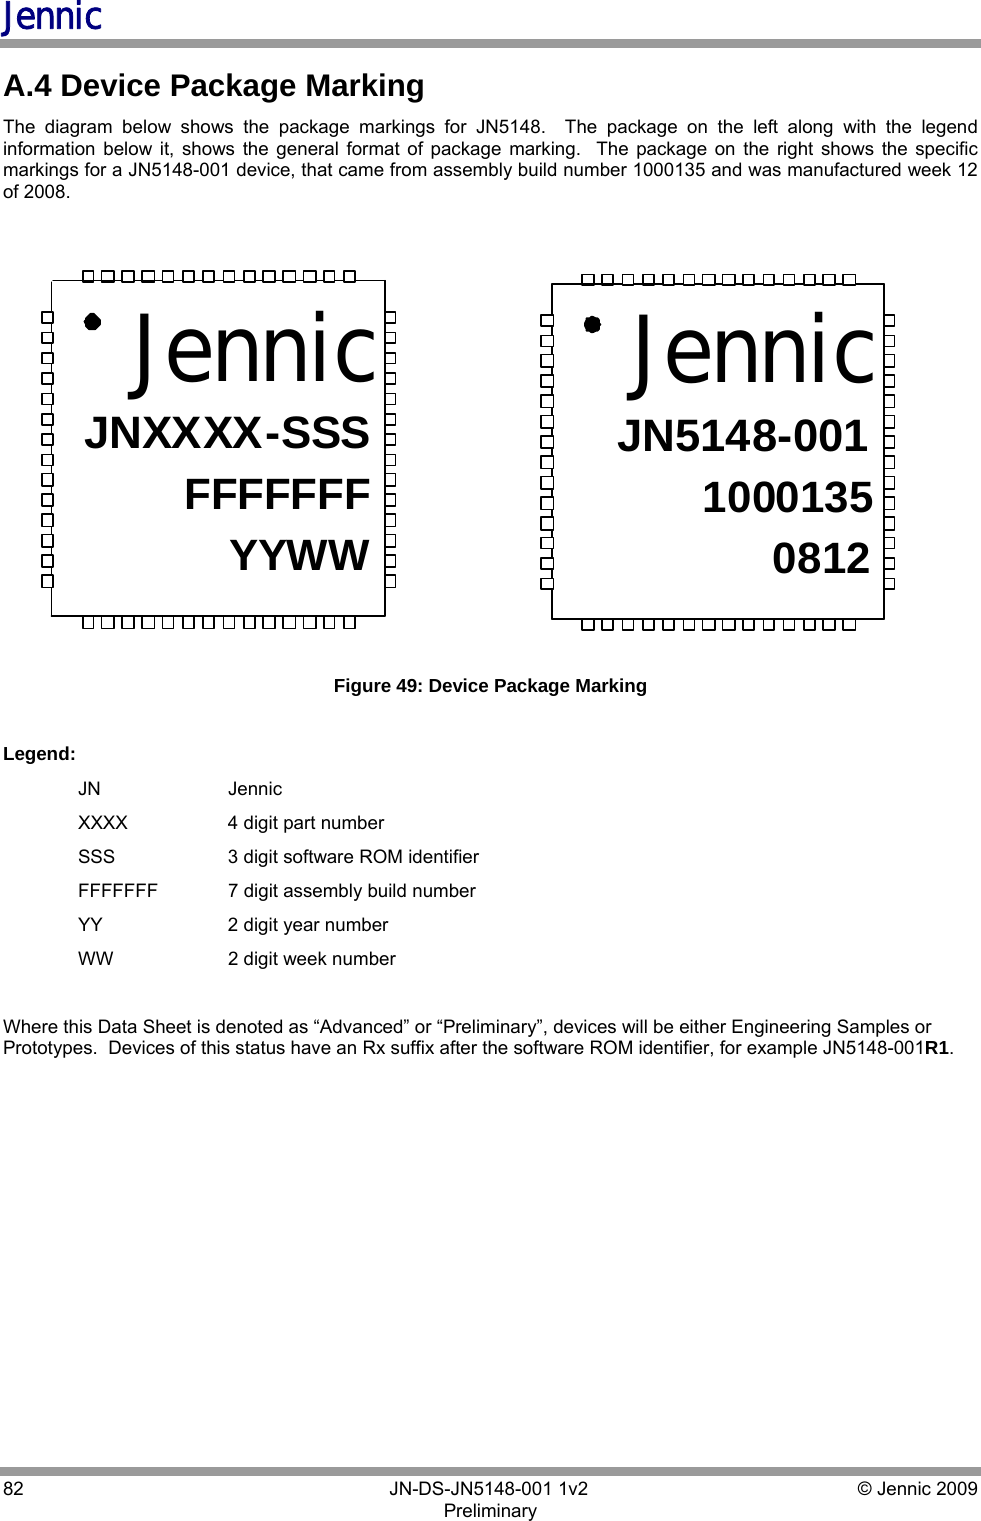 Jennic 82        JN-DS-JN5148-001 1v2  © Jennic 2009 Preliminary  A.4 Device Package Marking The diagram below shows the package markings for JN5148.  The package on the left along with the legend information below it, shows the general format of package marking.  The package on the right shows the specific markings for a JN5148-001 device, that came from assembly build number 1000135 and was manufactured week 12 of 2008.  Jennic JN XXXX -SSS FFFFFFF YYWW Jennic JN5148-001 0812 1000135  Figure 49: Device Package Marking  Legend:  JN  Jennic   XXXX    4 digit part number   SSS    3 digit software ROM identifier   FFFFFFF  7 digit assembly build number  YY  2 digit year number  WW  2 digit week number  Where this Data Sheet is denoted as “Advanced” or “Preliminary”, devices will be either Engineering Samples or Prototypes.  Devices of this status have an Rx suffix after the software ROM identifier, for example JN5148-001R1.  